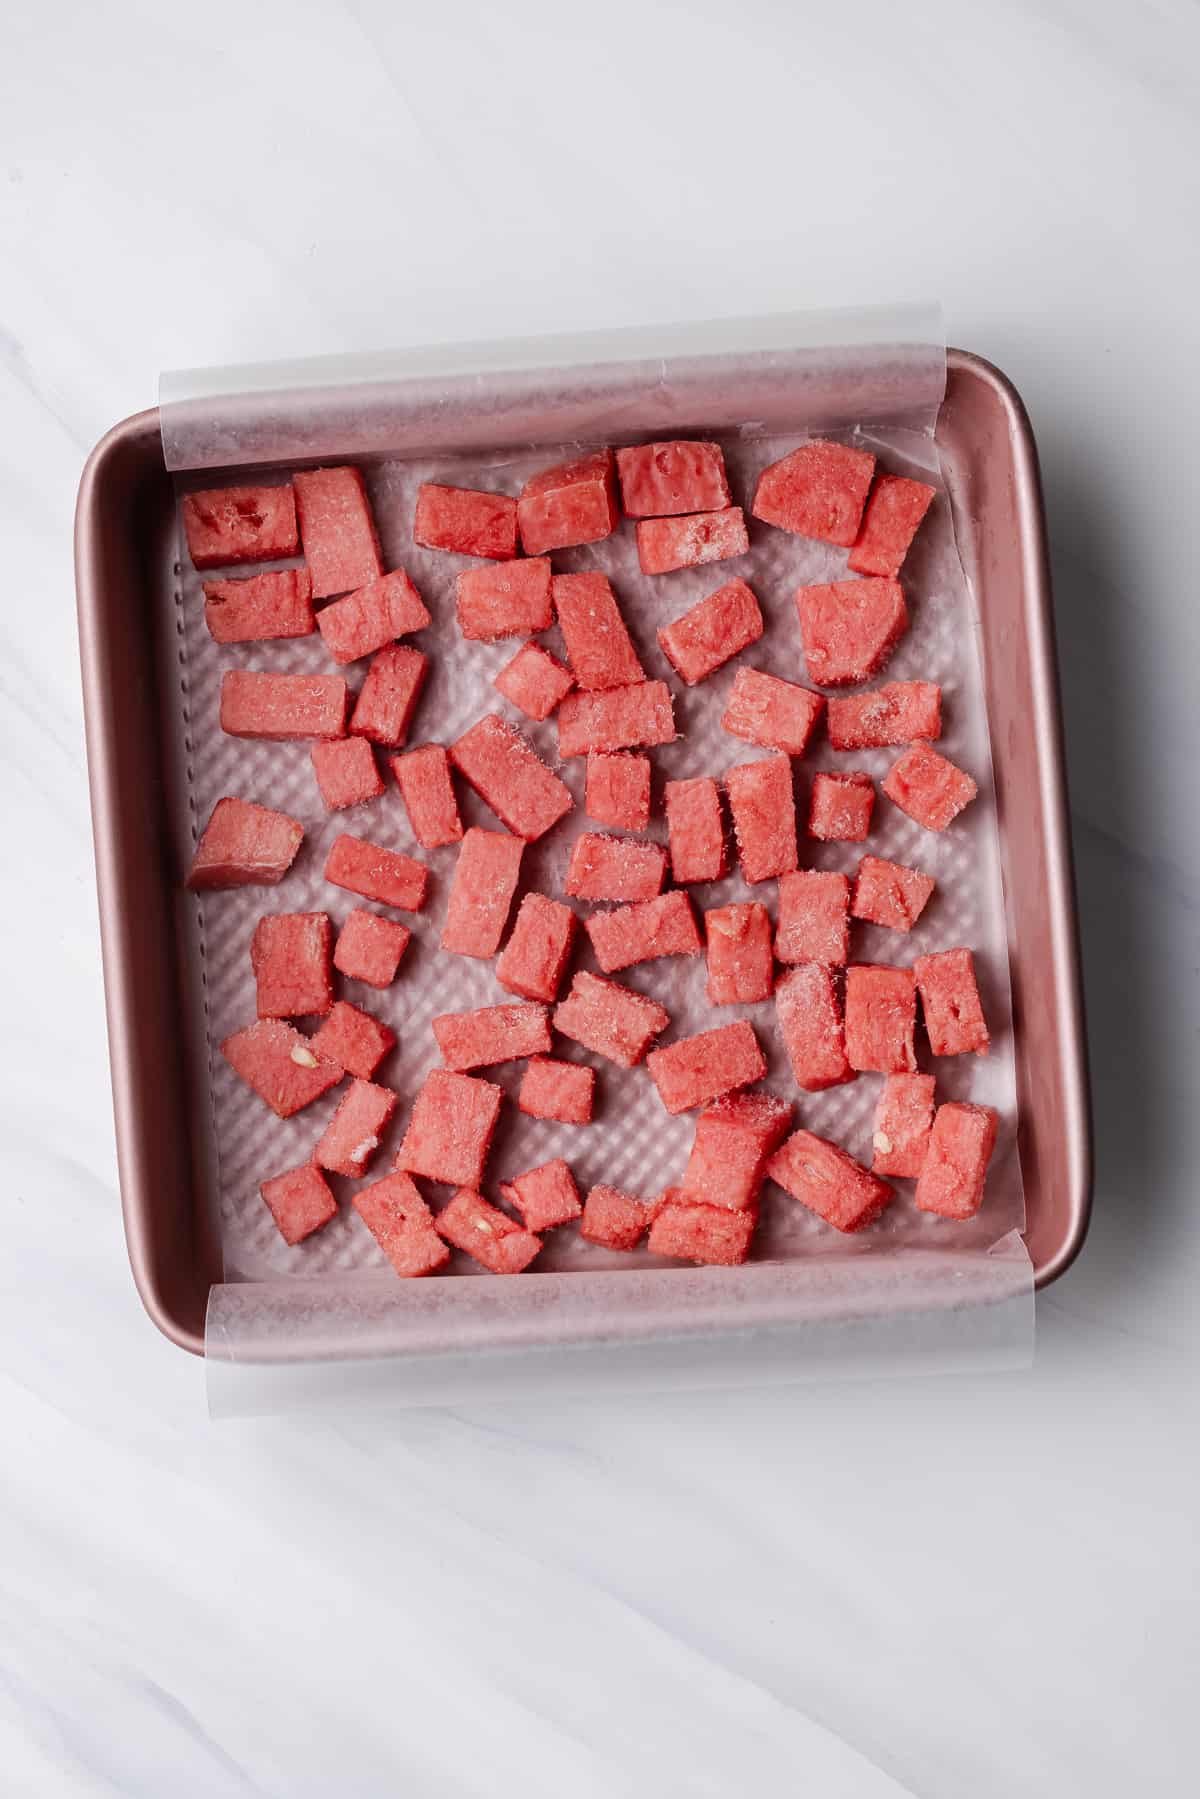 Frozen diced watermelon in square baking pan.